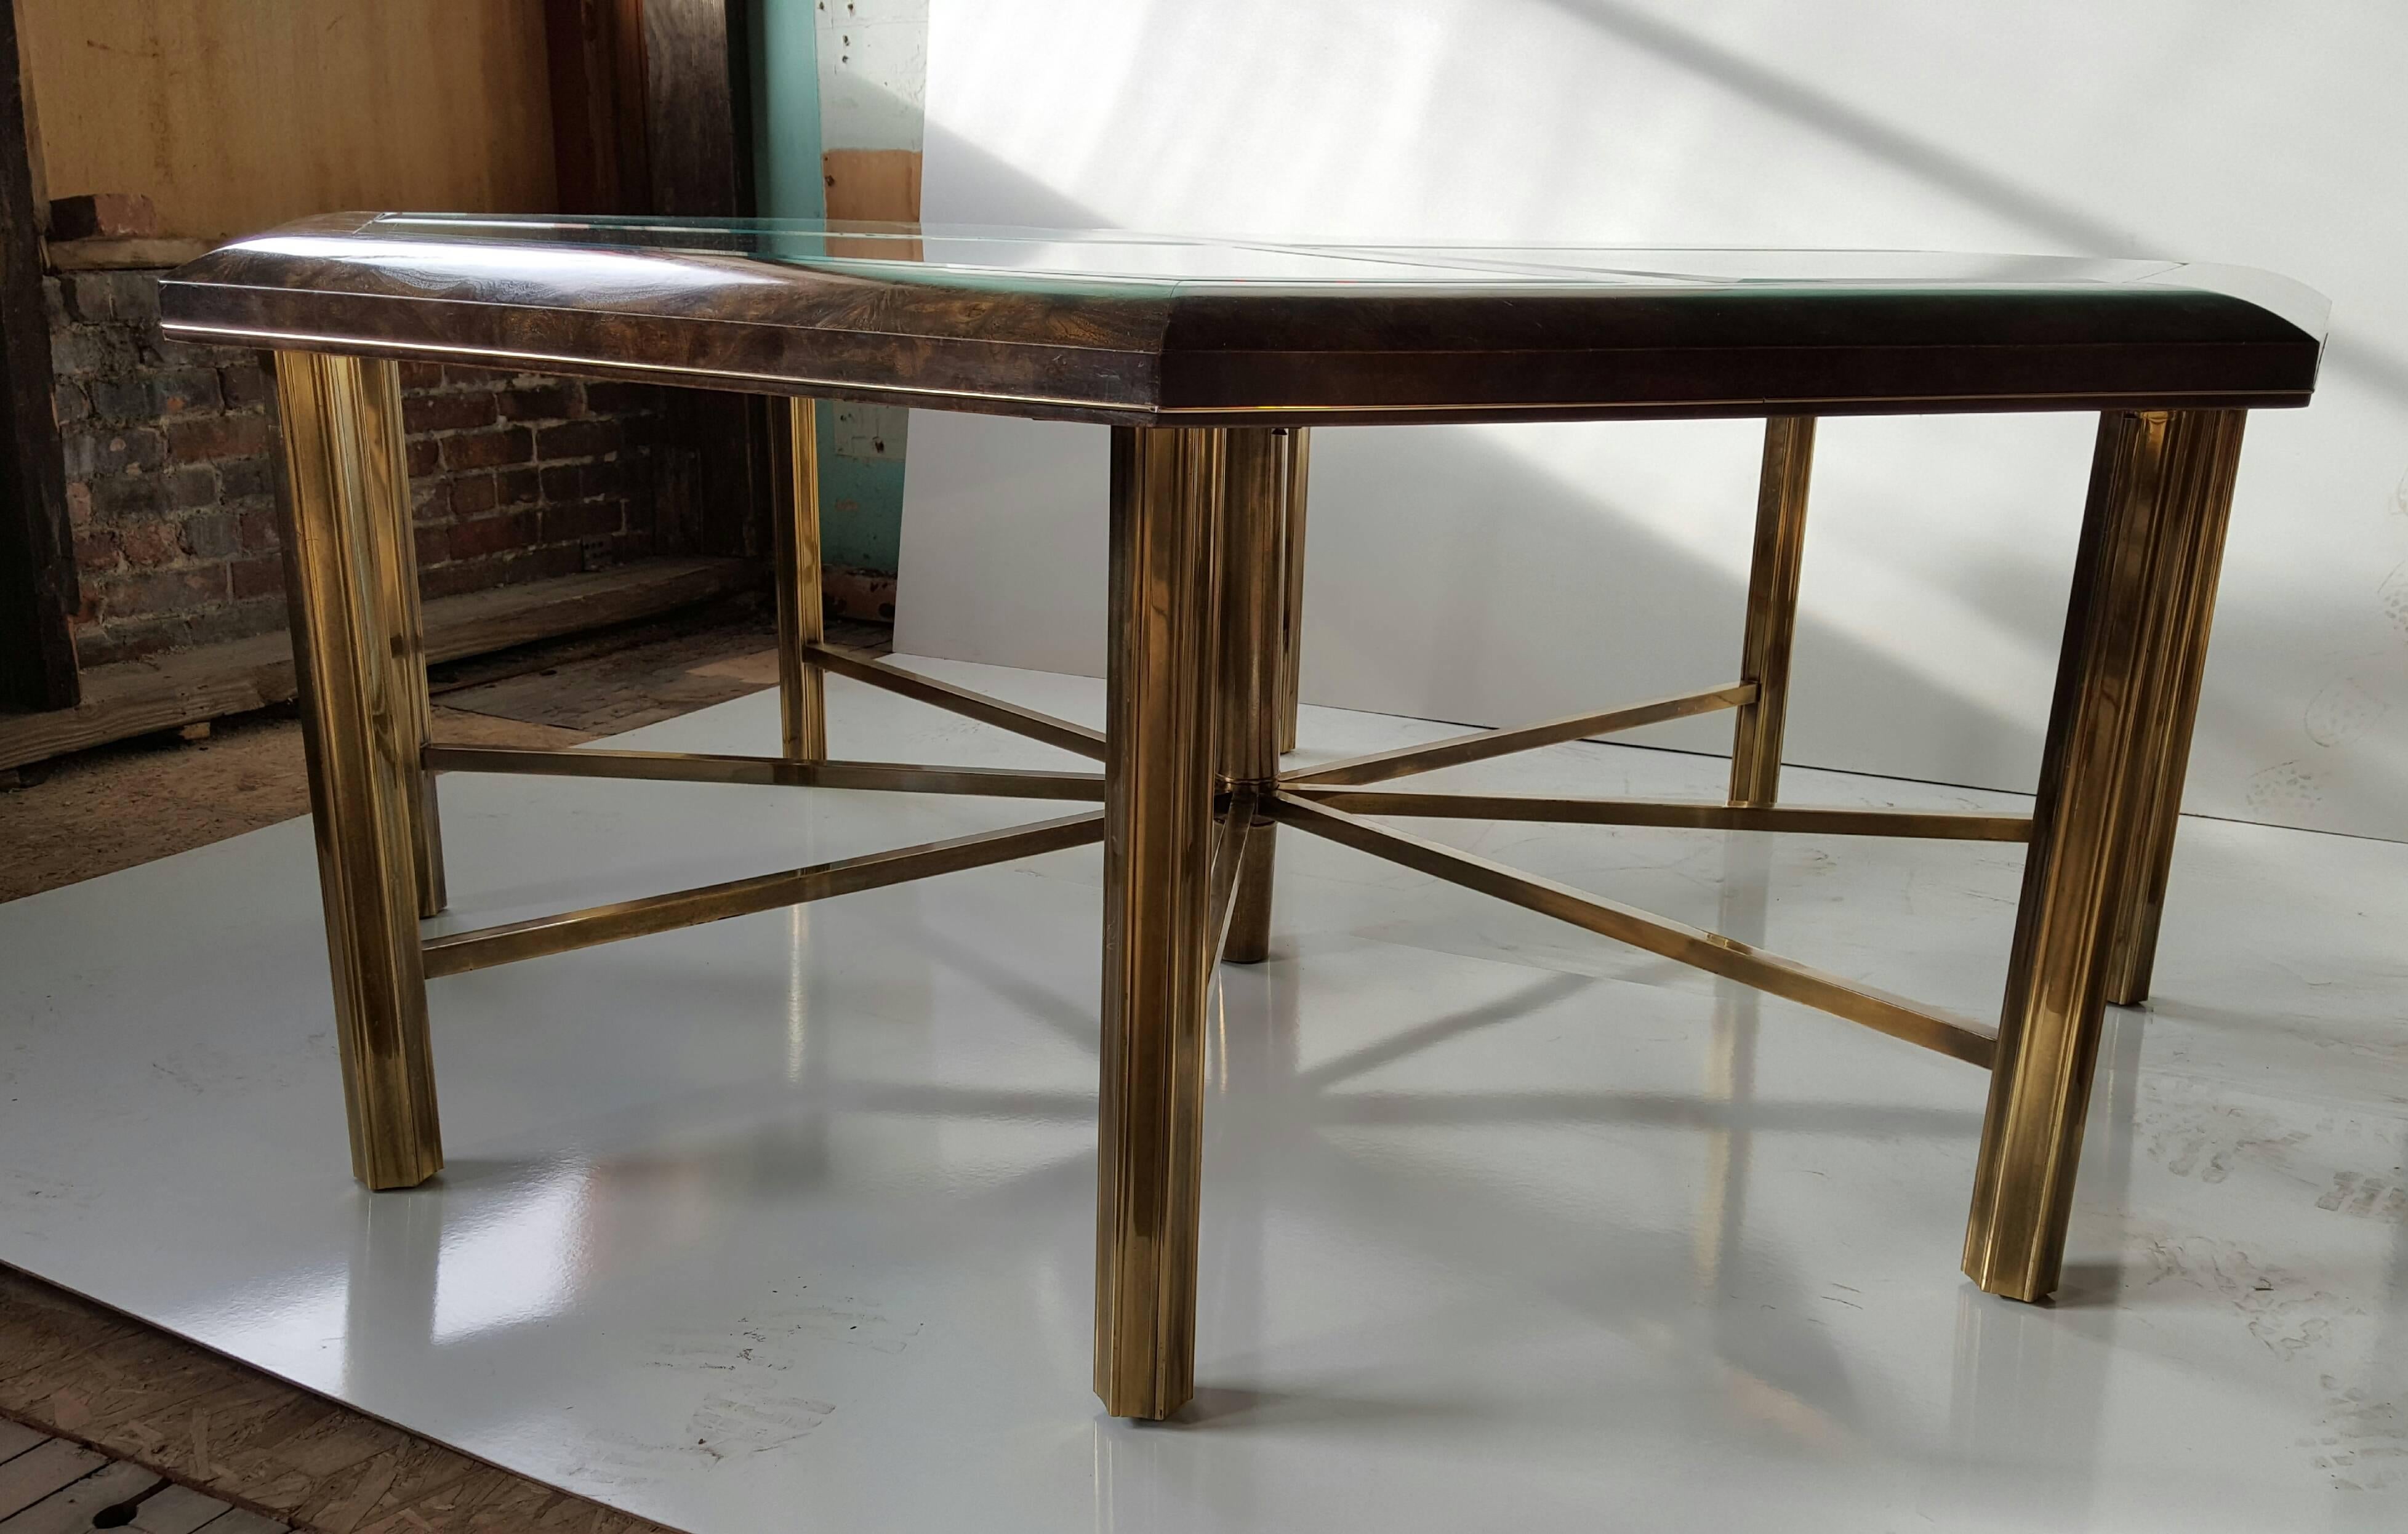 Monumental Burl Elm and Brass Eight-Sided Dining Table by Mastercraft In Good Condition For Sale In Buffalo, NY